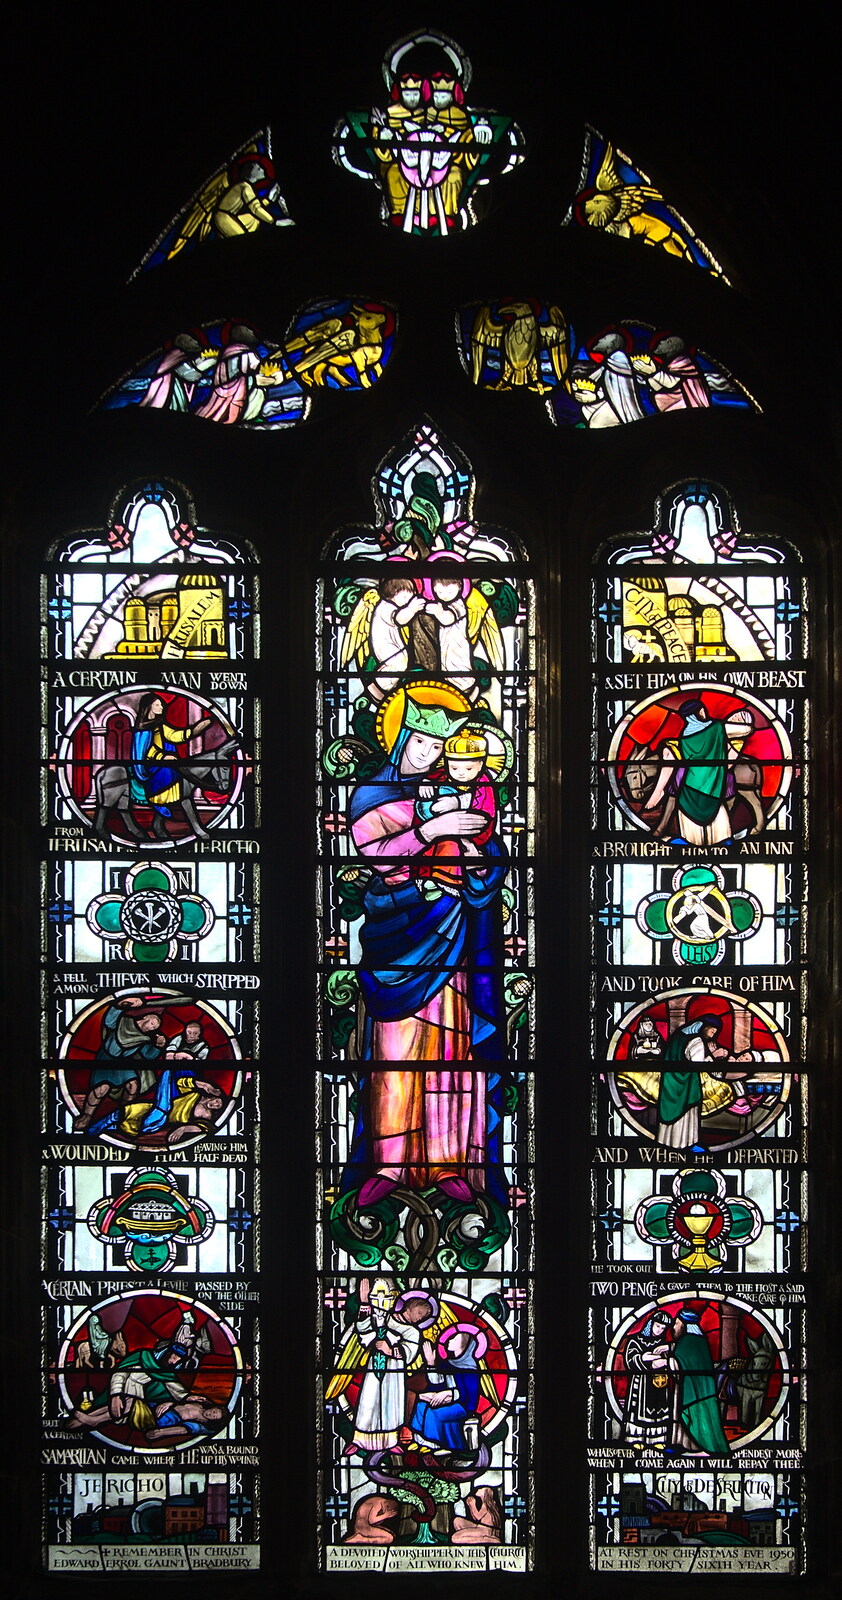 Stained-glass window, dated 1950 from Chesterfield and the Twisty Spire, Derbyshire - 19th April 2013